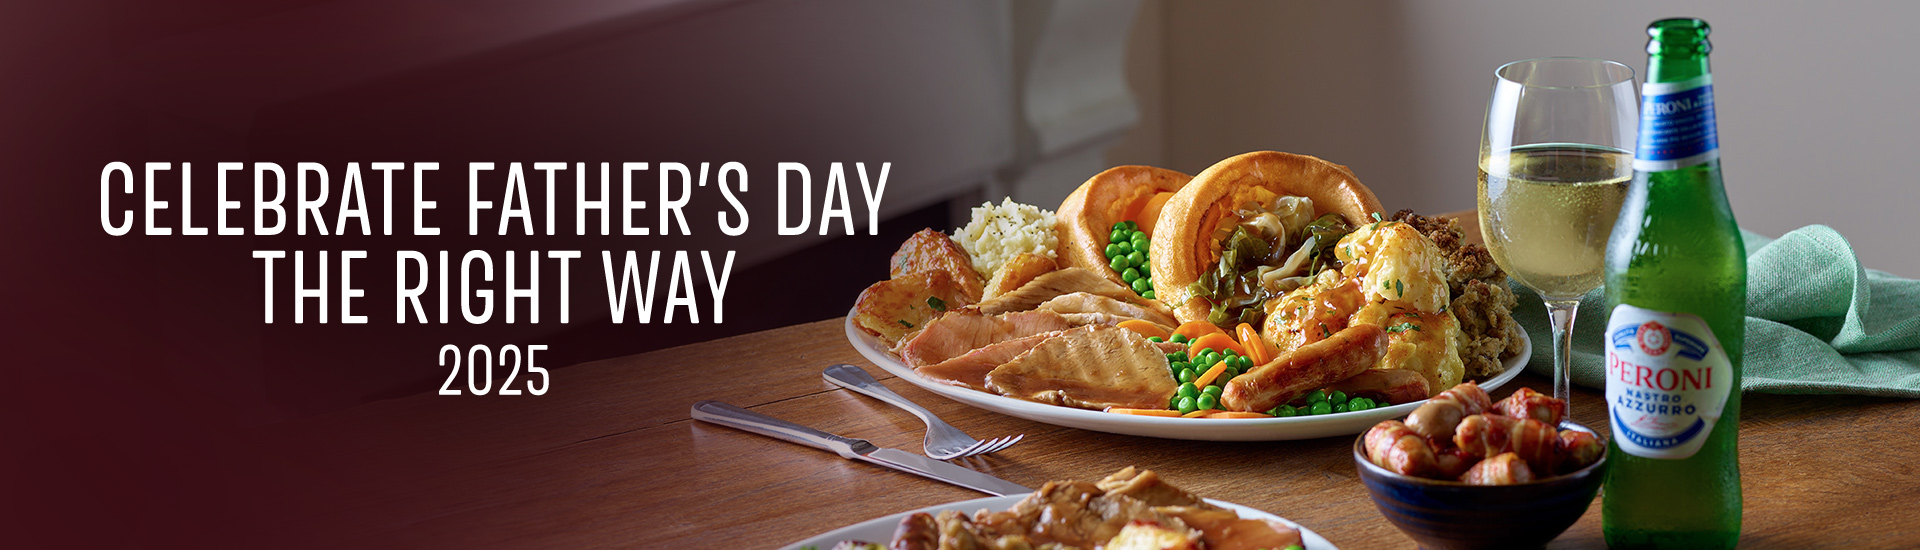 Father’s day carvery in Watford